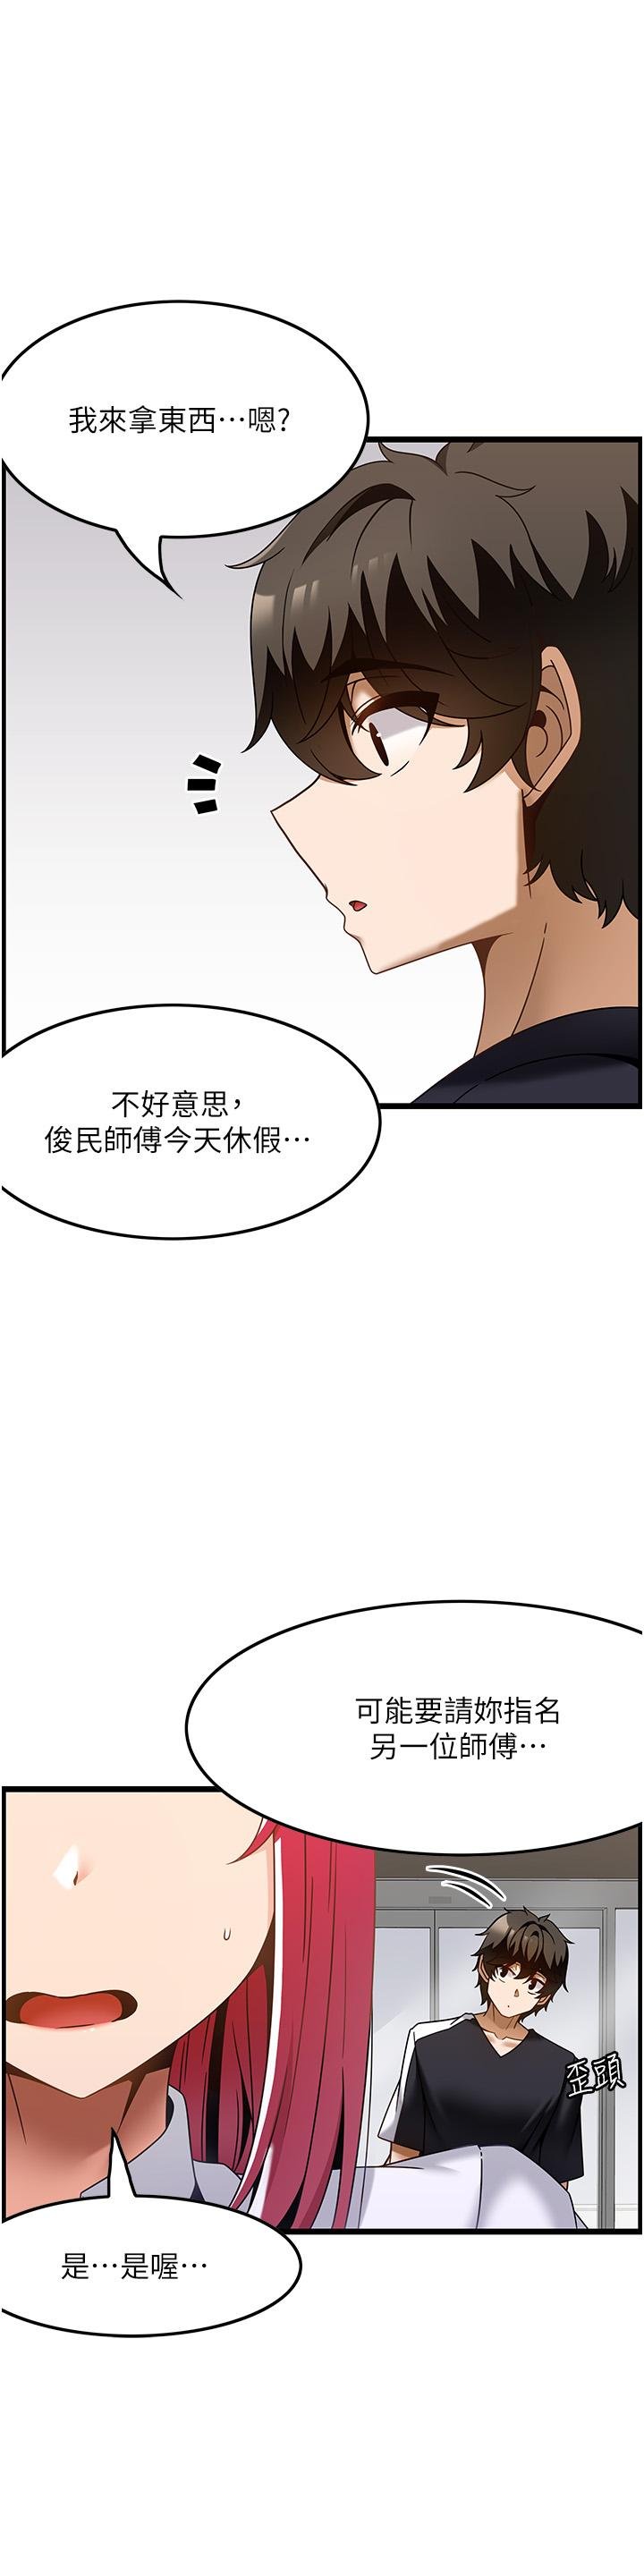 too-good-at-massages-raw-chap-36-7